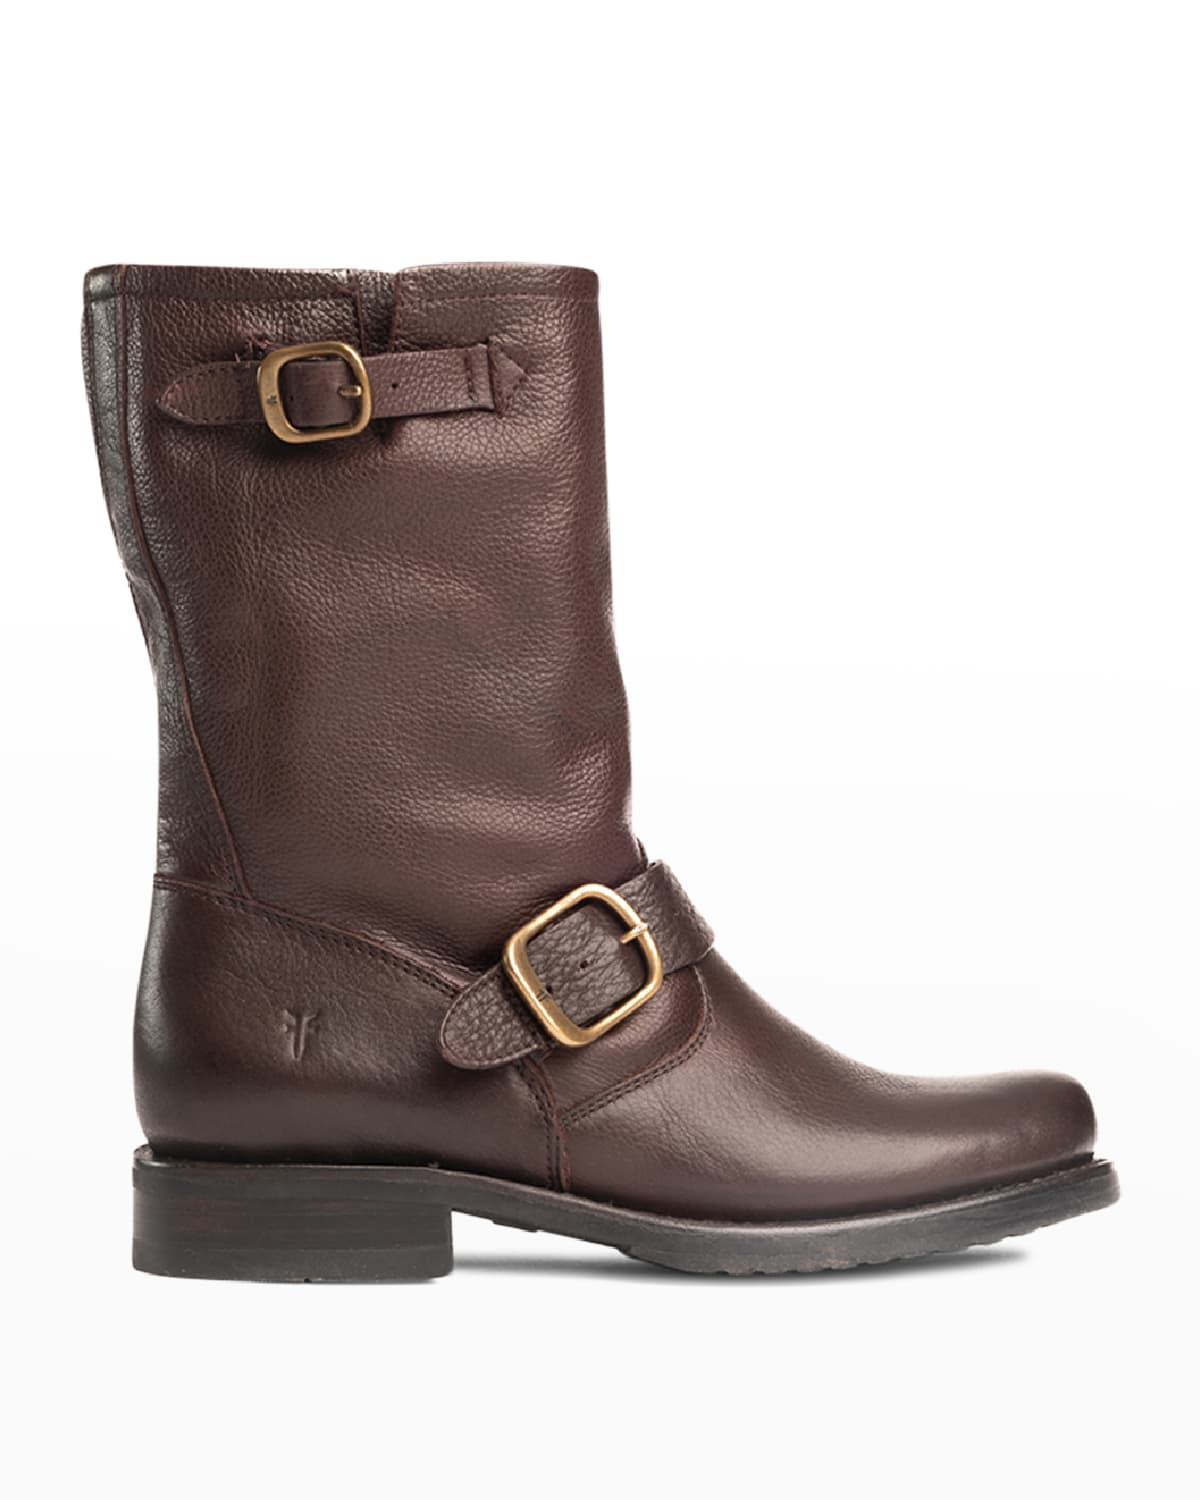 FRYE VERONICA LEATHER BUCKLE SHORT MOTO BOOTS